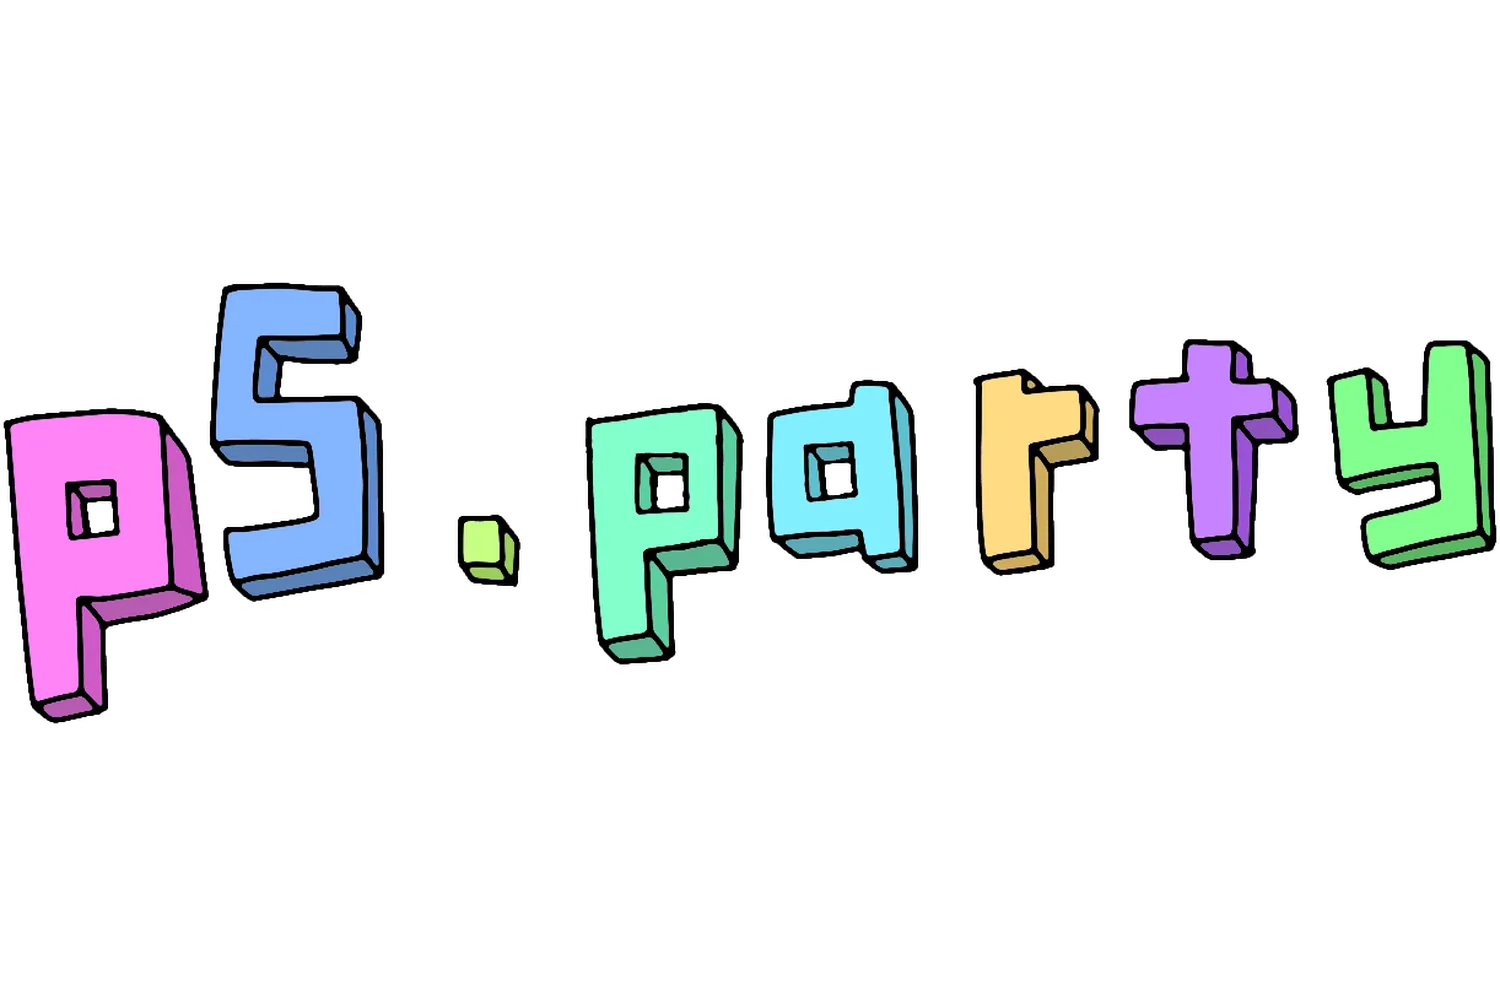 p5.party logo. cheerful pastel block letters spelling "p5.party"